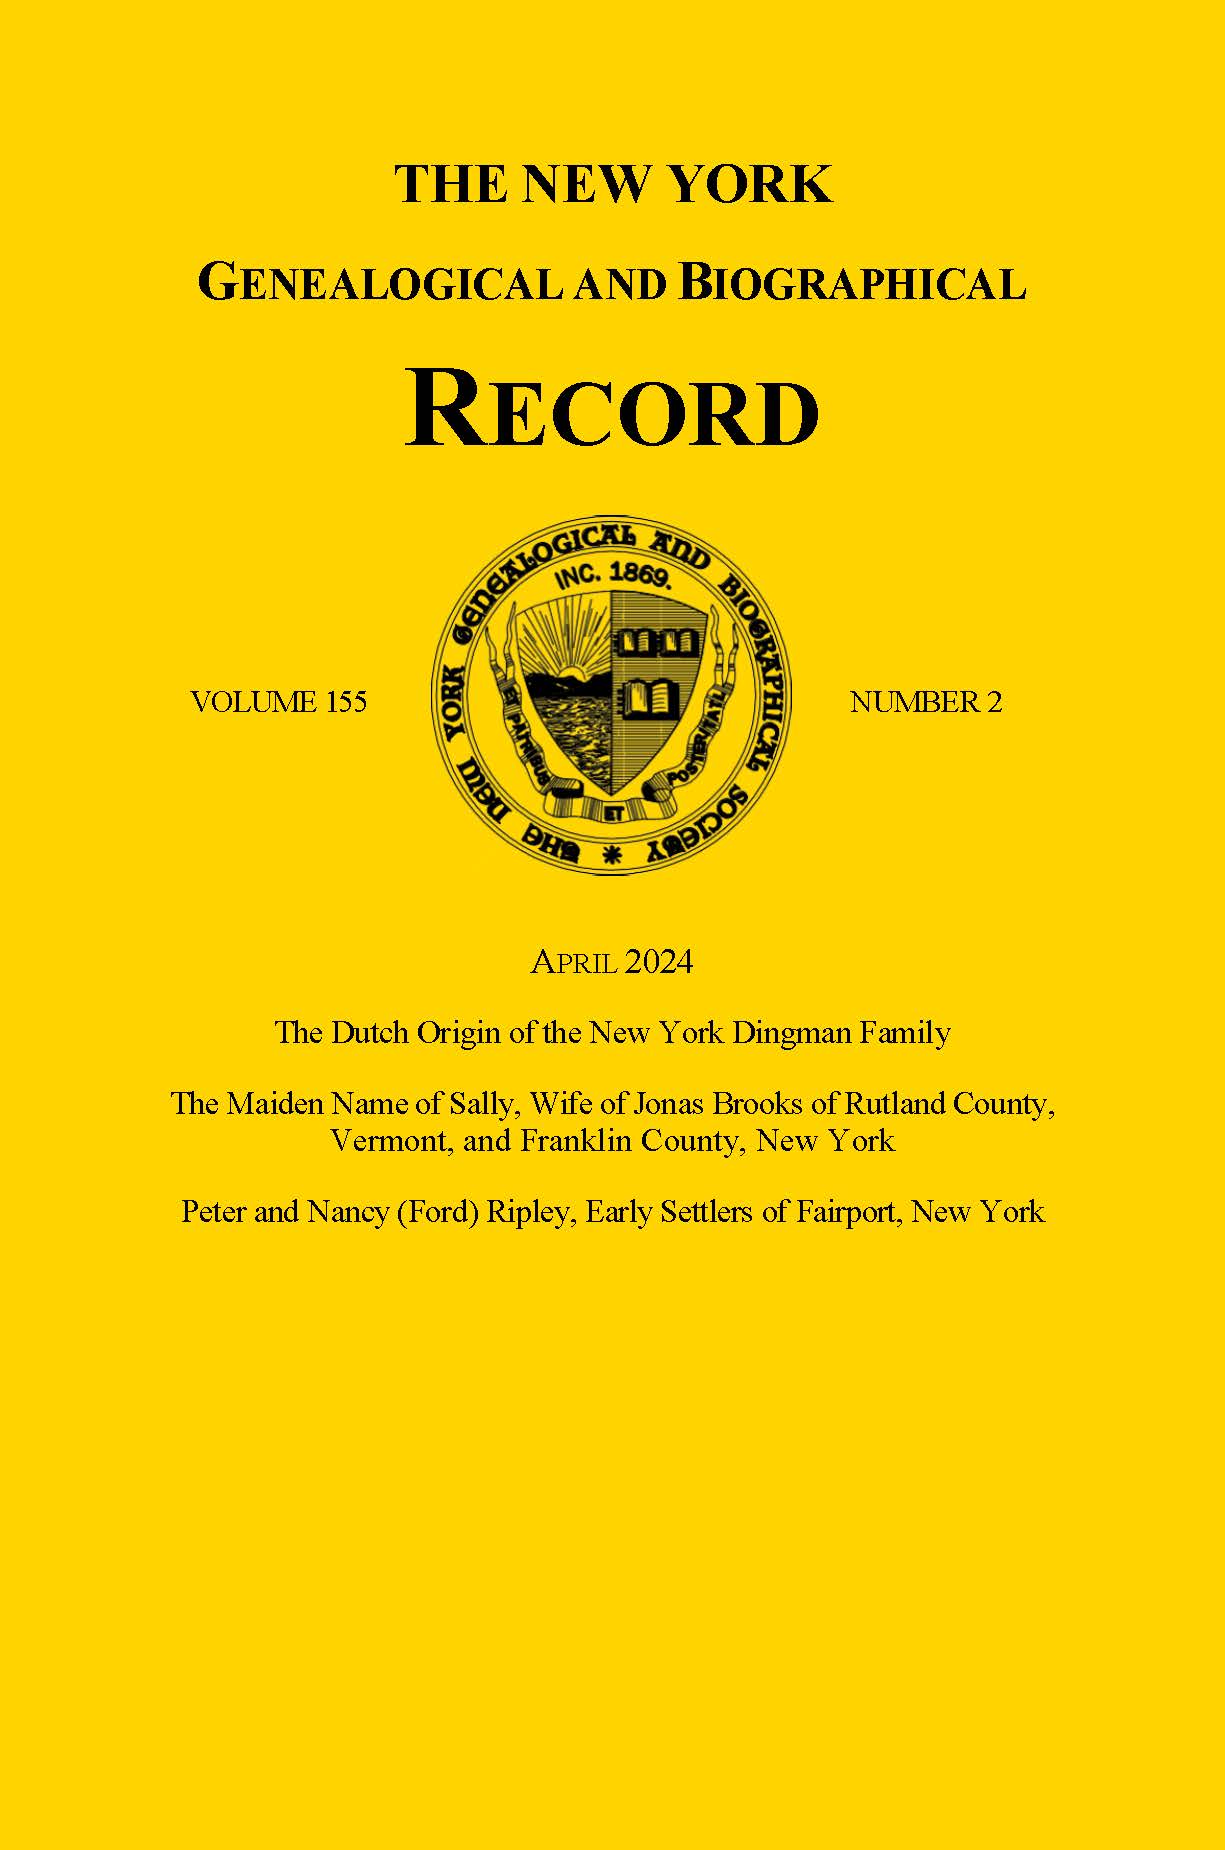 Cover of April 2024 issue of the Record